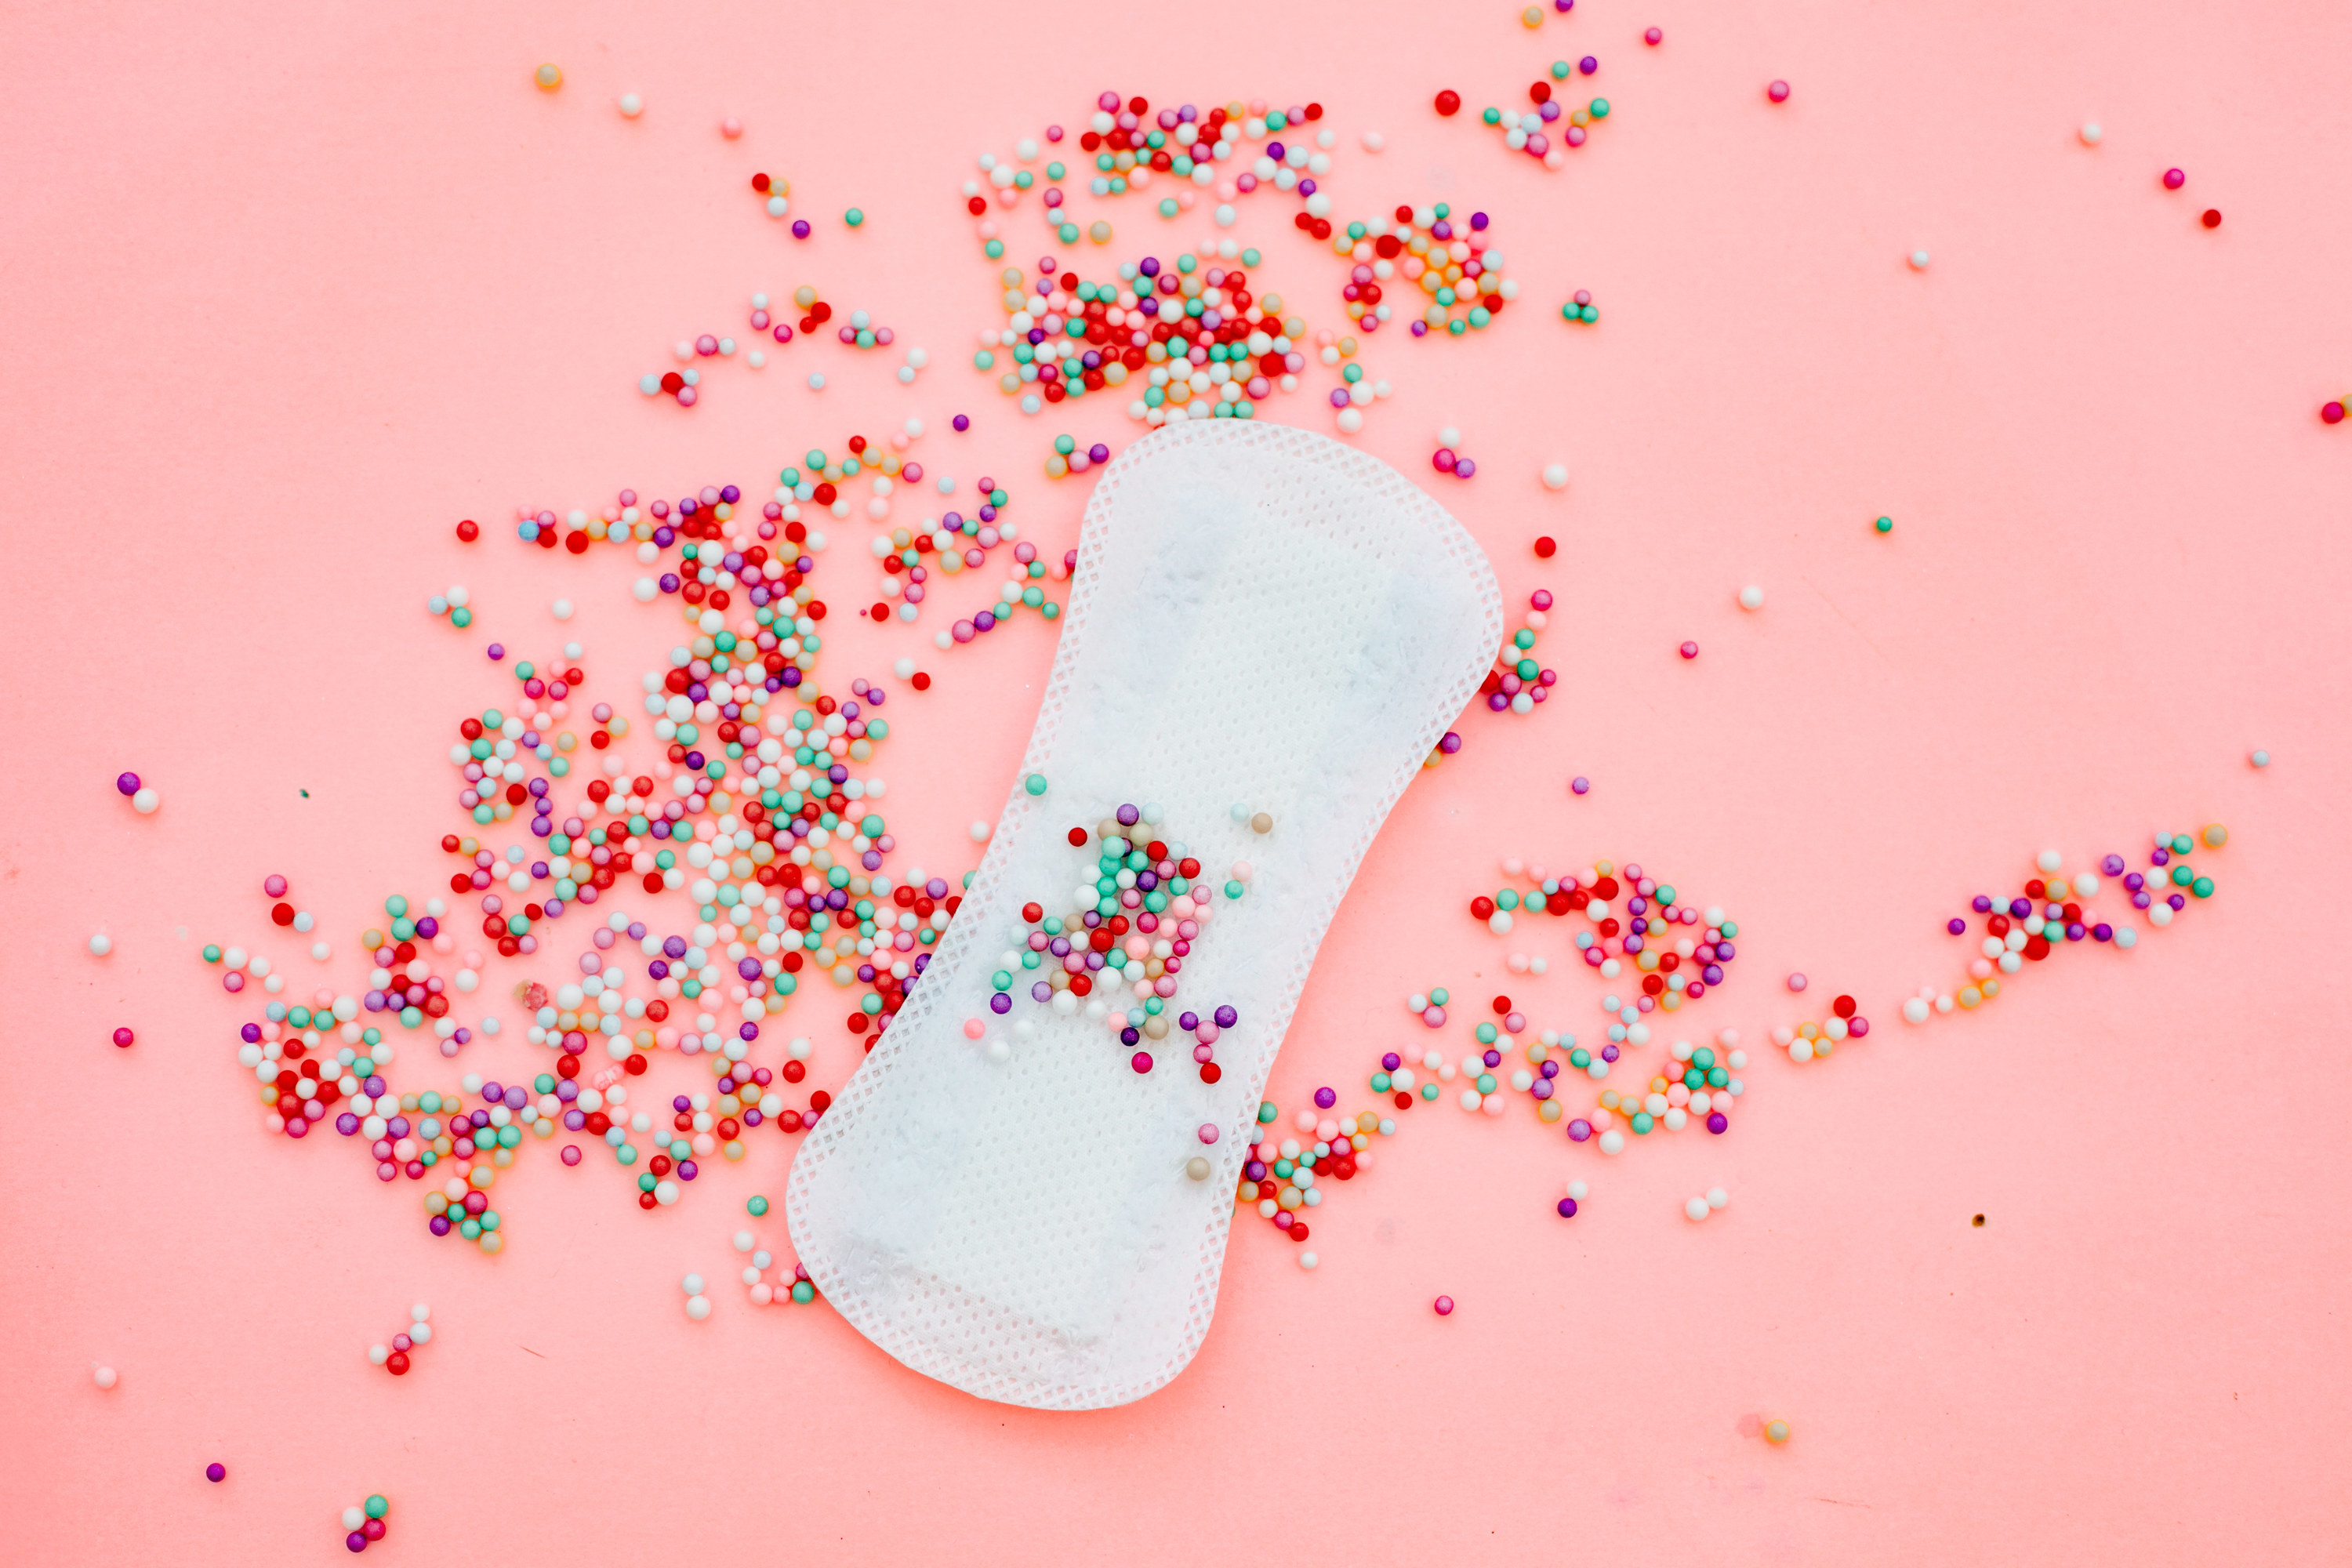 An image of a menstrual pad on a pink background with sprinkles all over